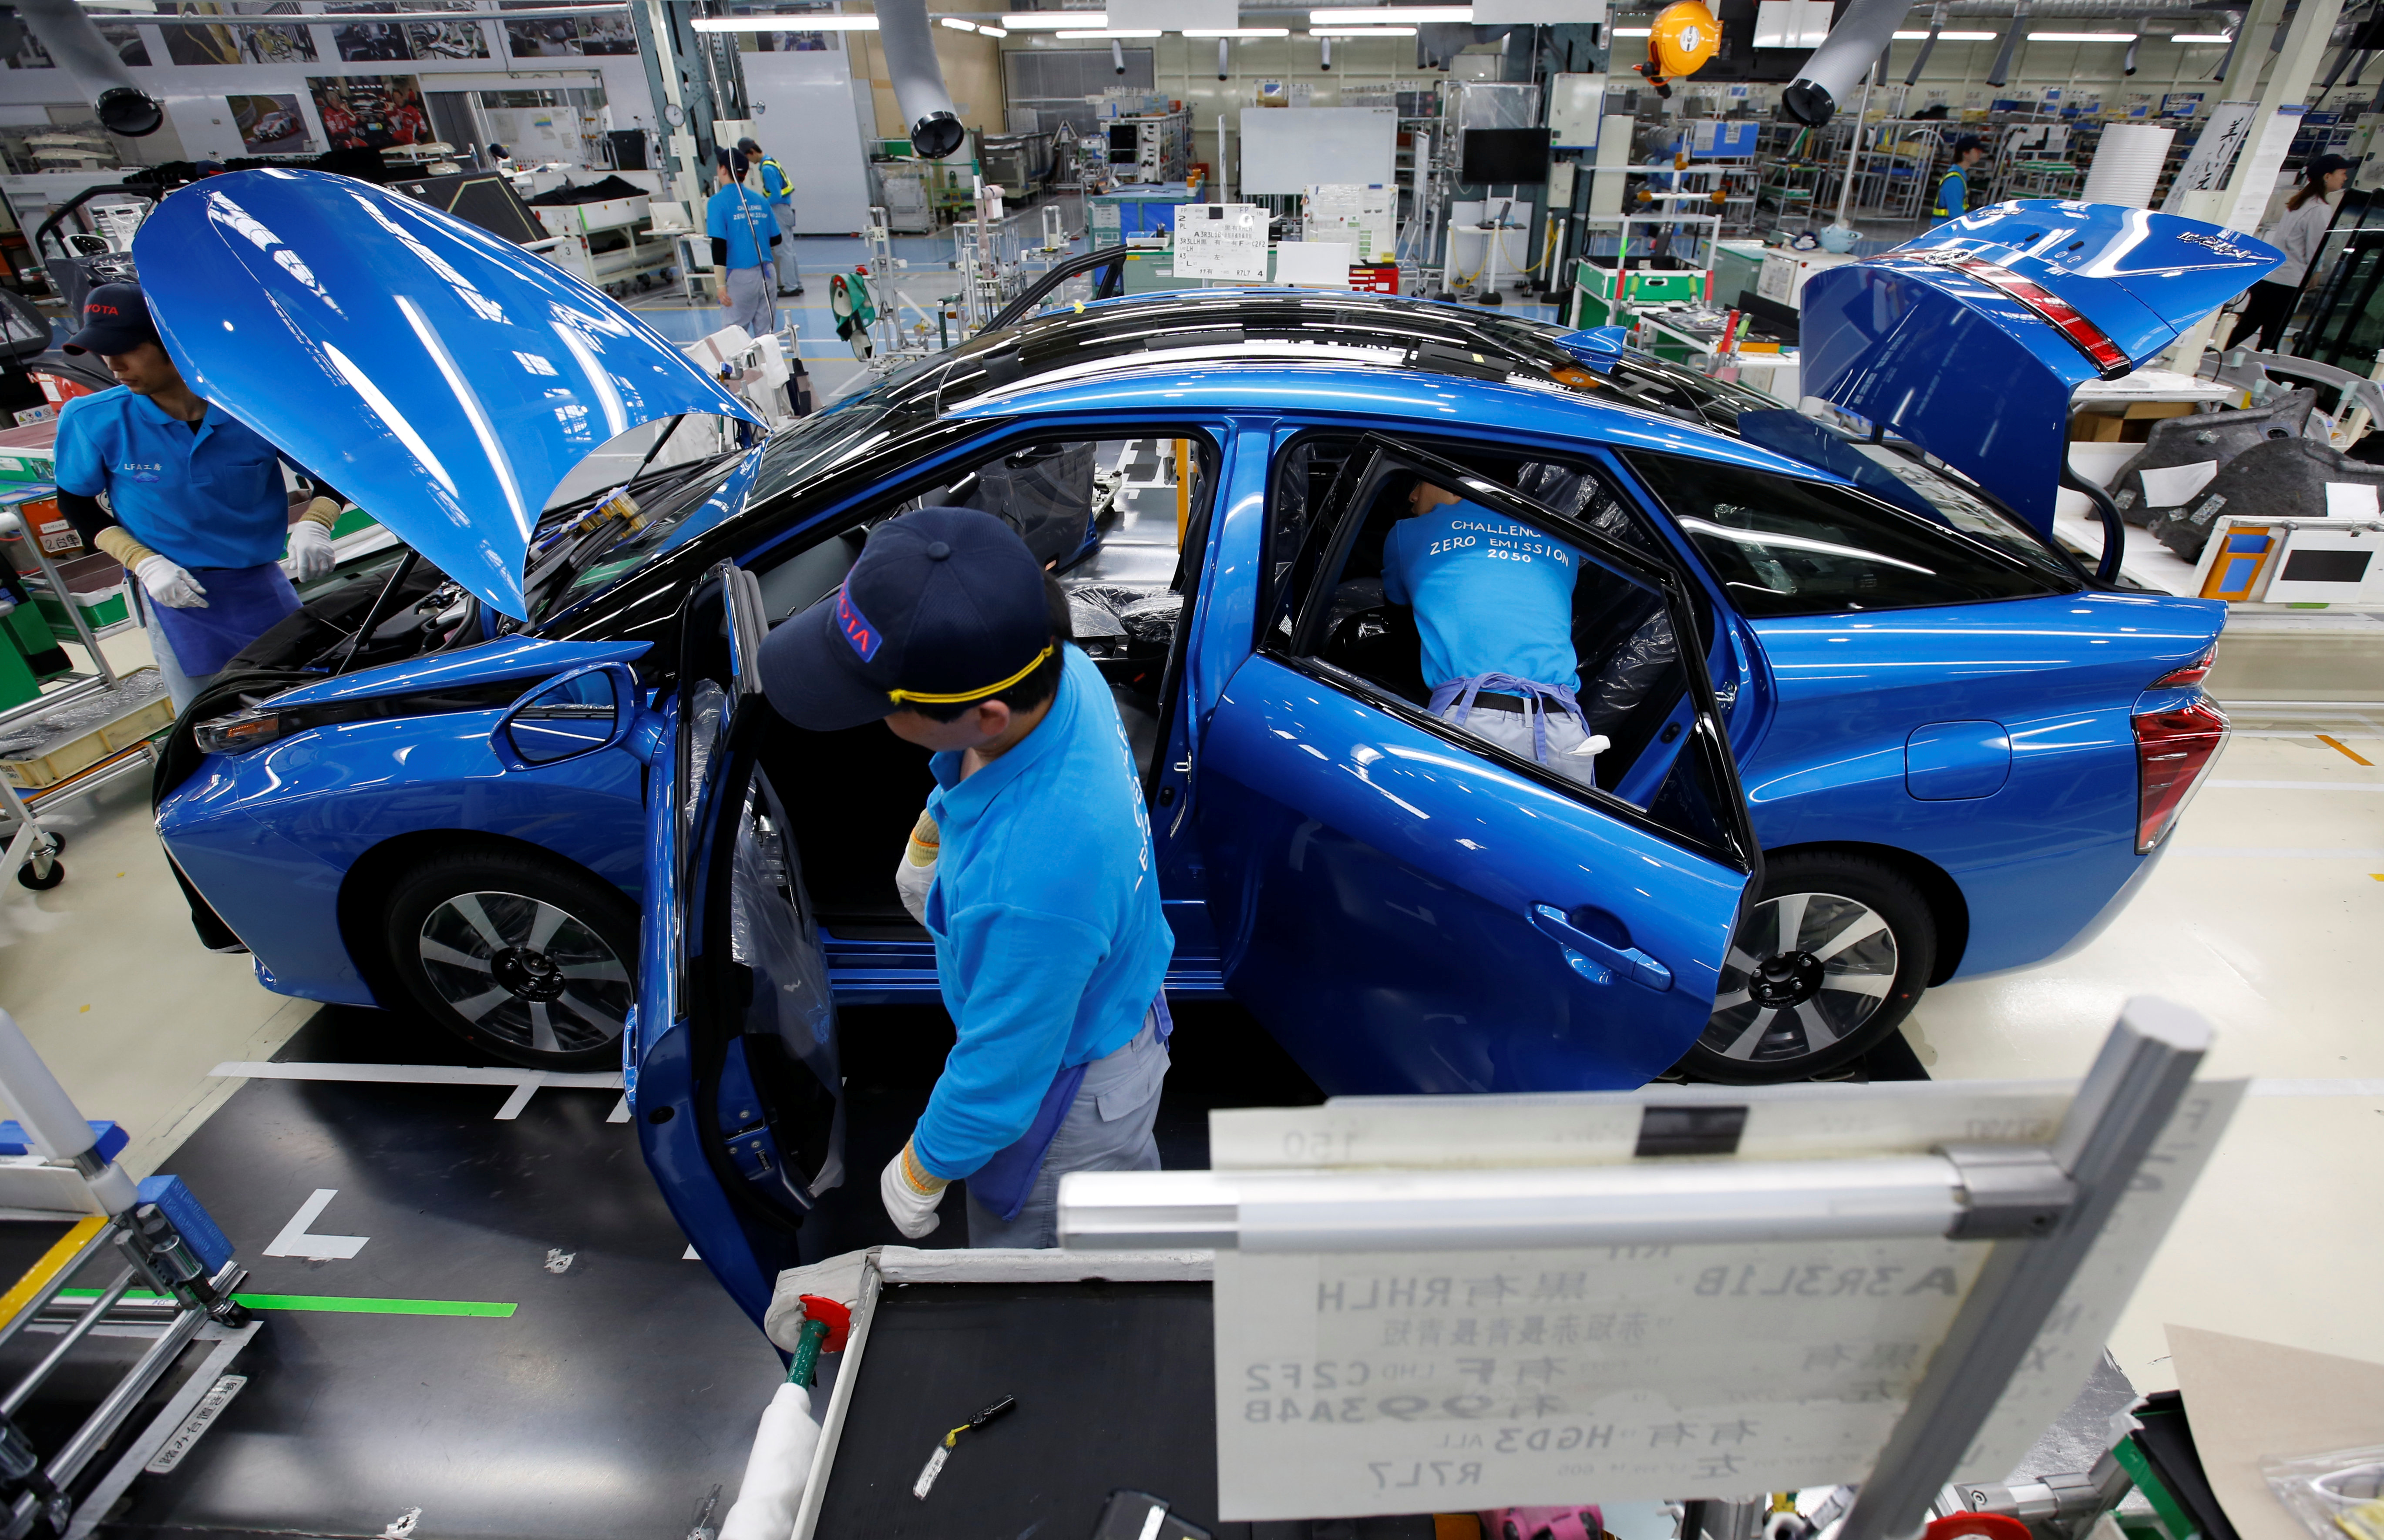 Employees of Toyota Motor Corp. work on assembly line in Toyota